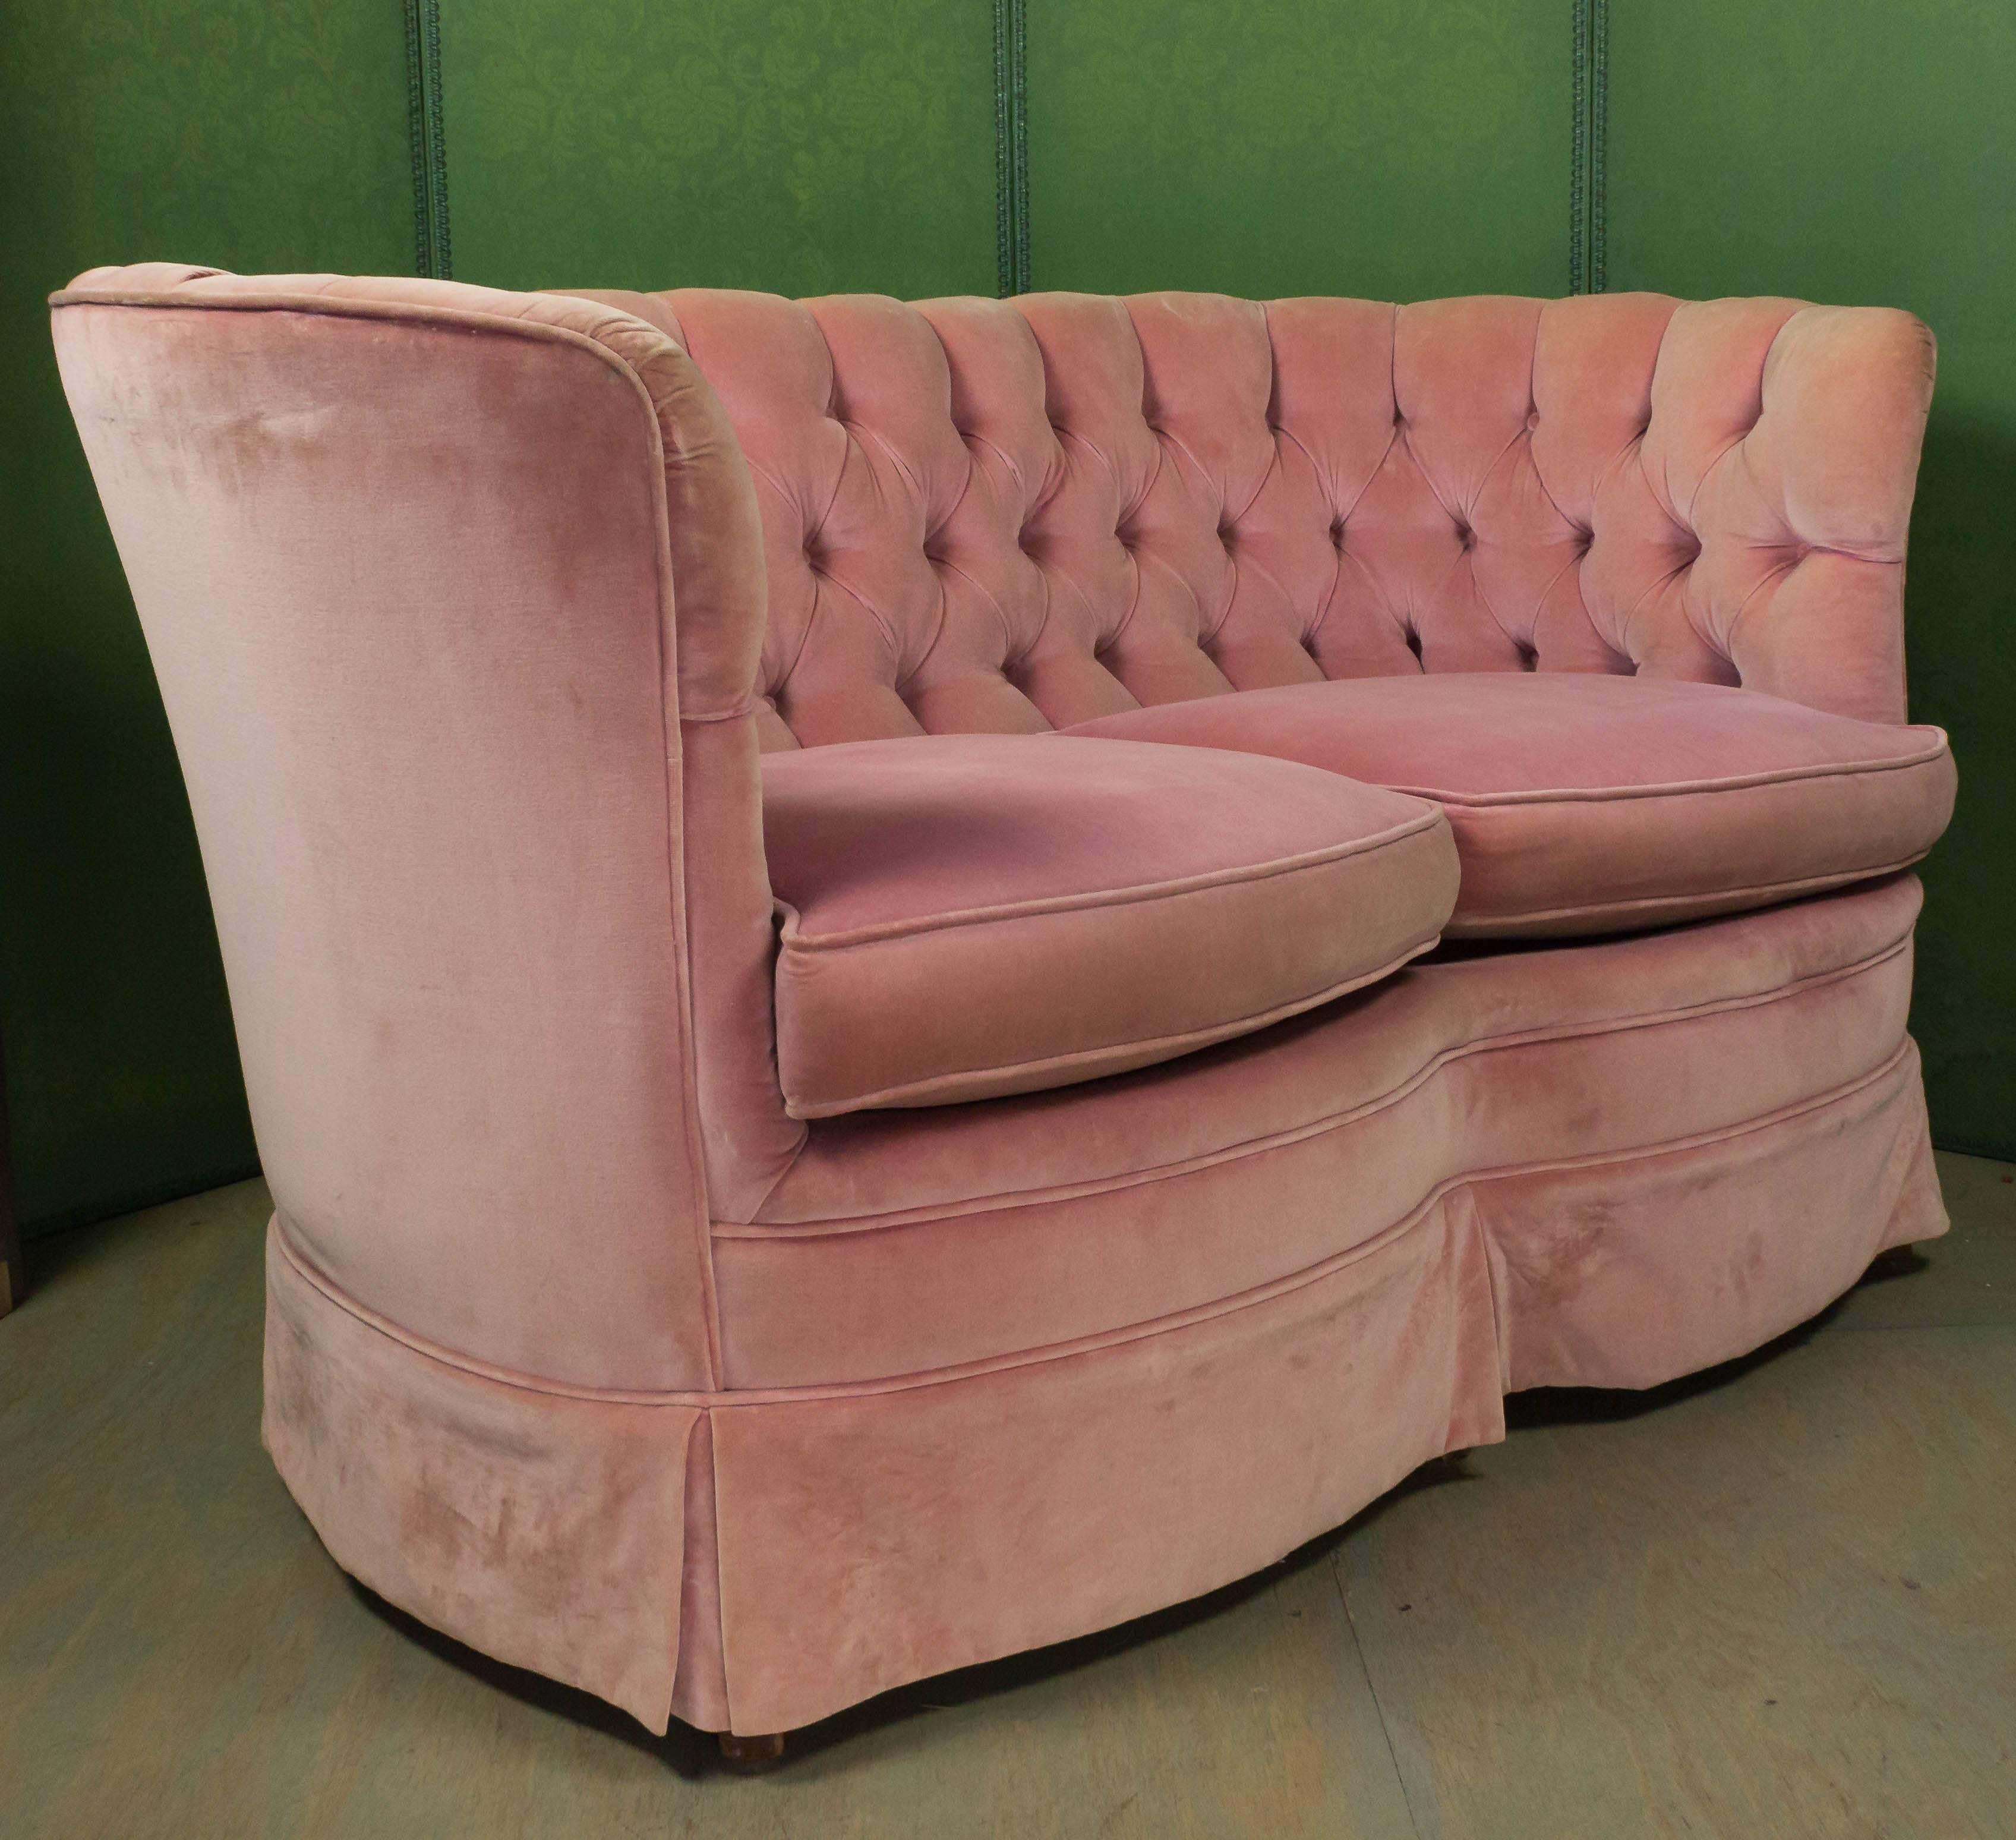 1940s curved tufted settee upholstered in soft pink velvet. The fabric shows signs of wear, but otherwise in good condition.  Sold as is. 


 